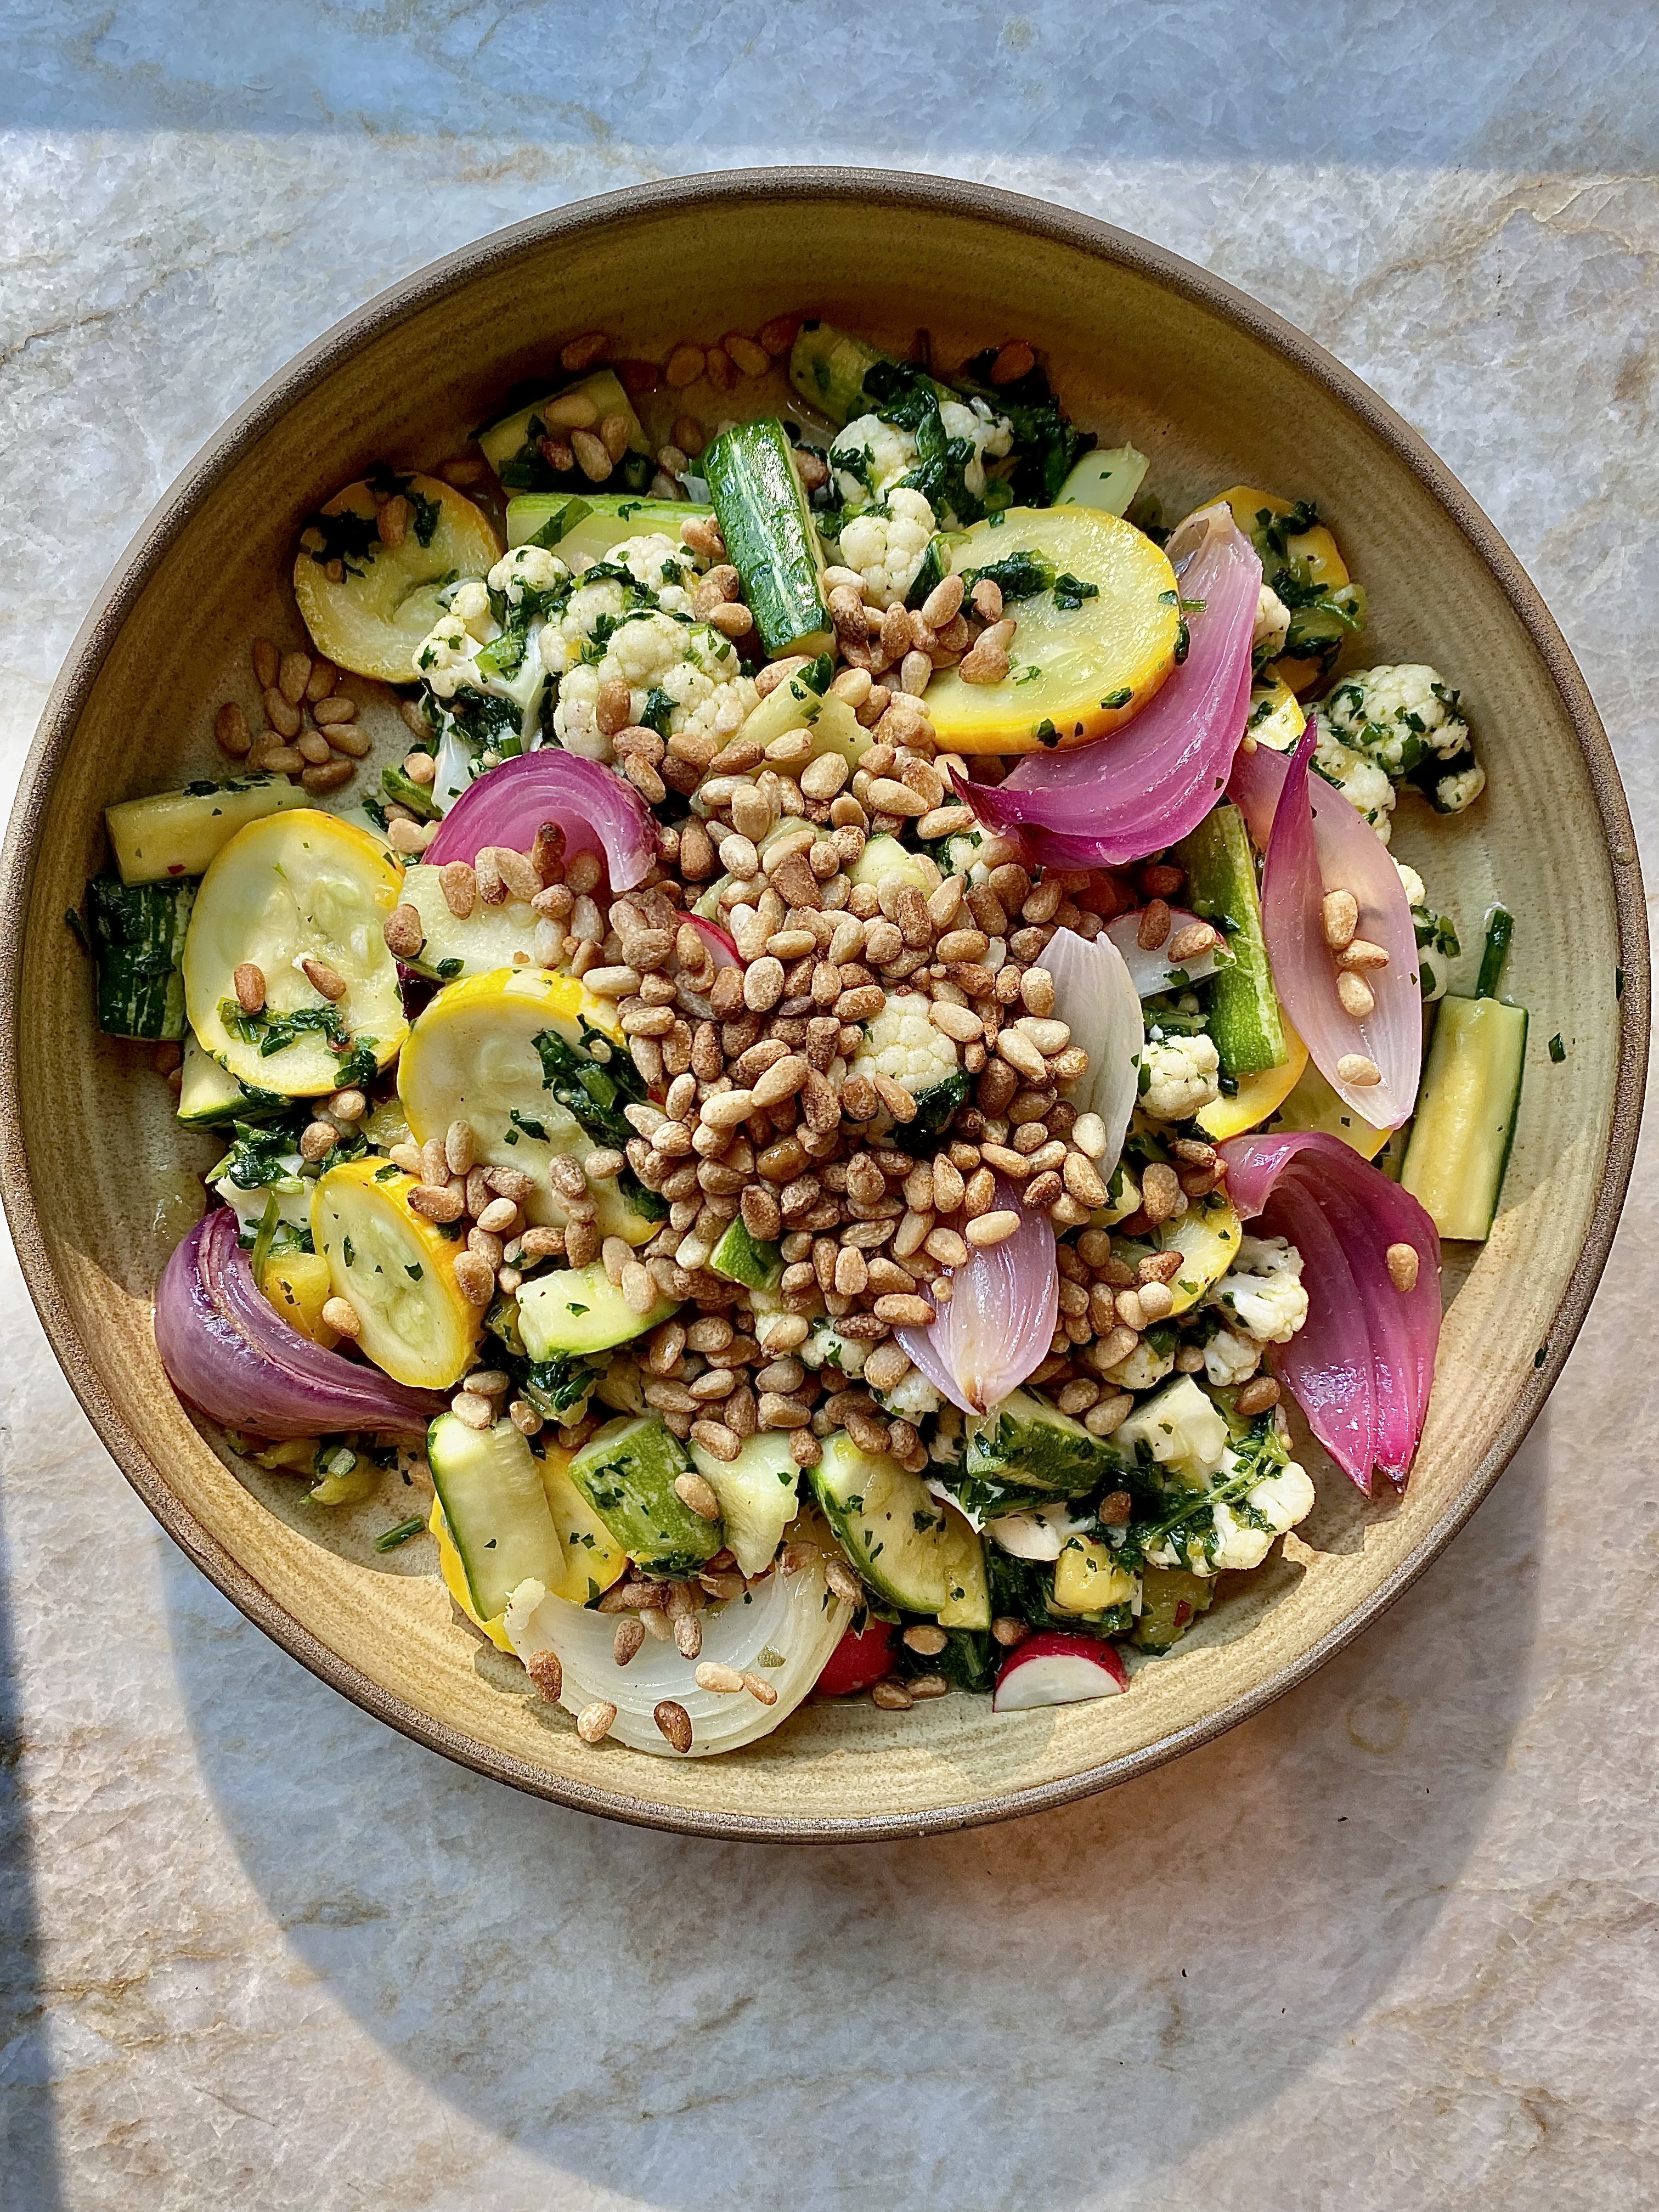 Zingy Seasonal Vegetables w/ Toasted Nuts